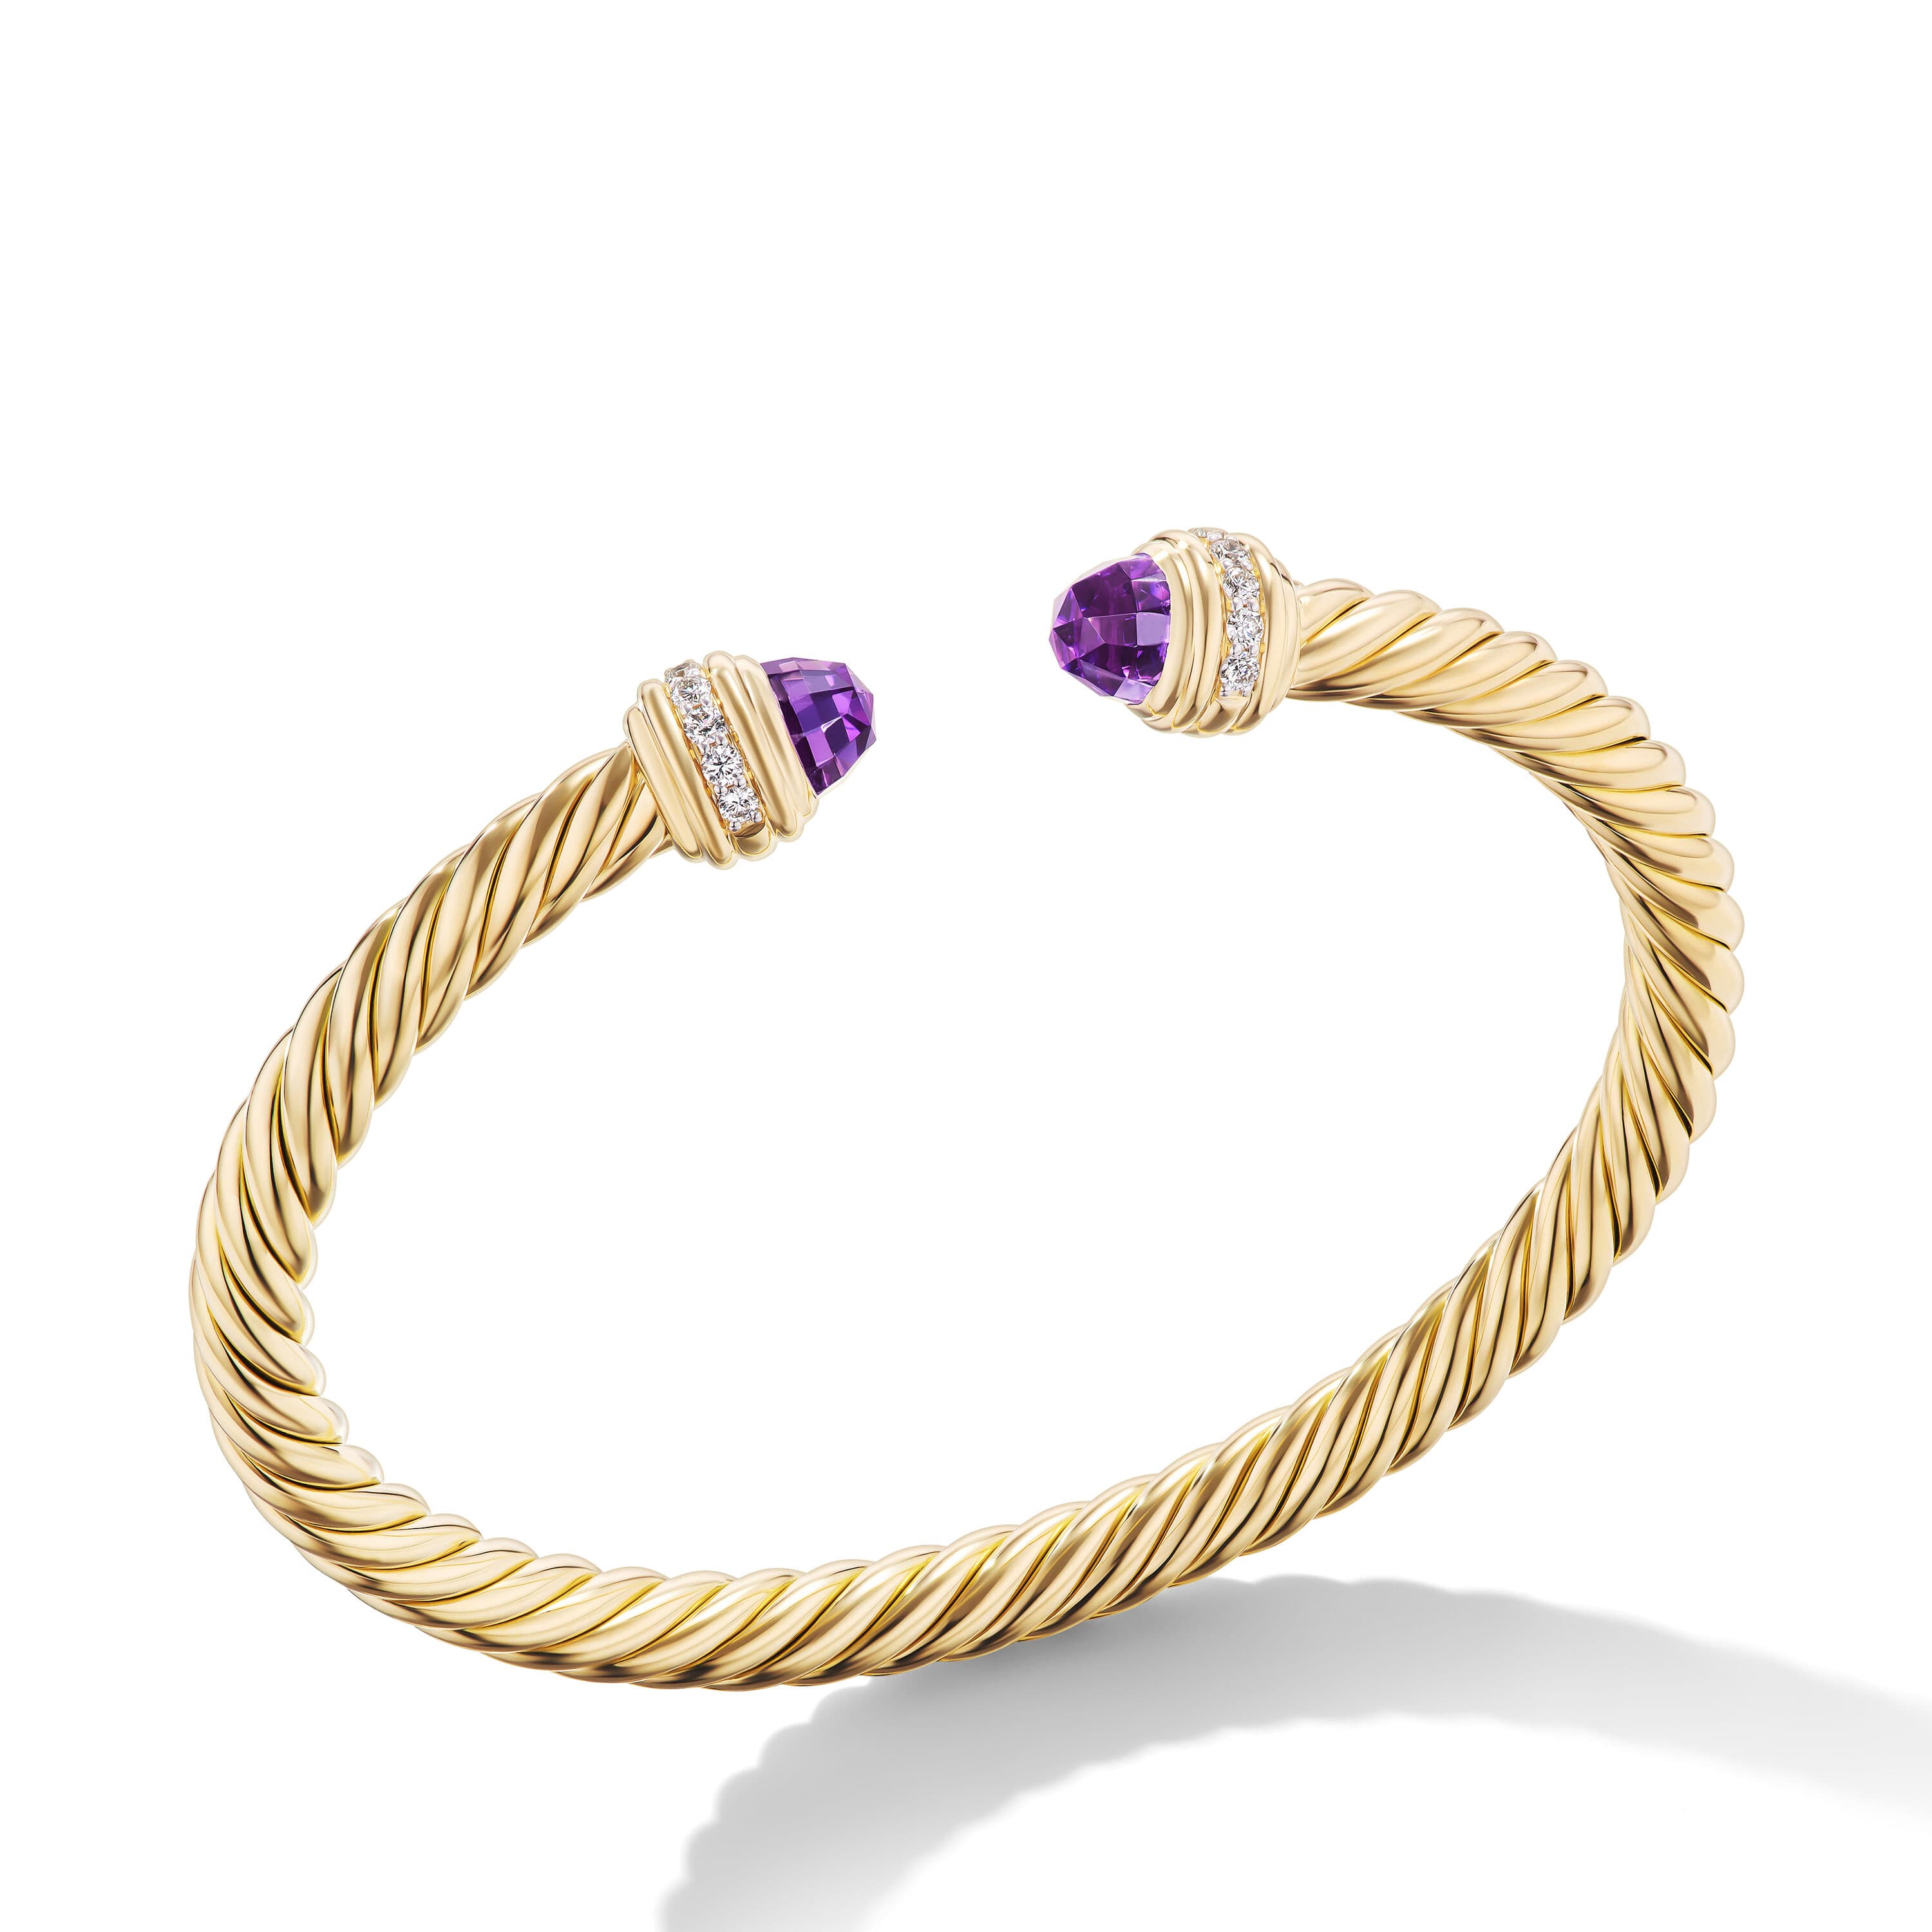 David Yurman Classic Cablespira 5mm Bracelet in 18K Yellow Gold with Amethyst and Diamonds 1